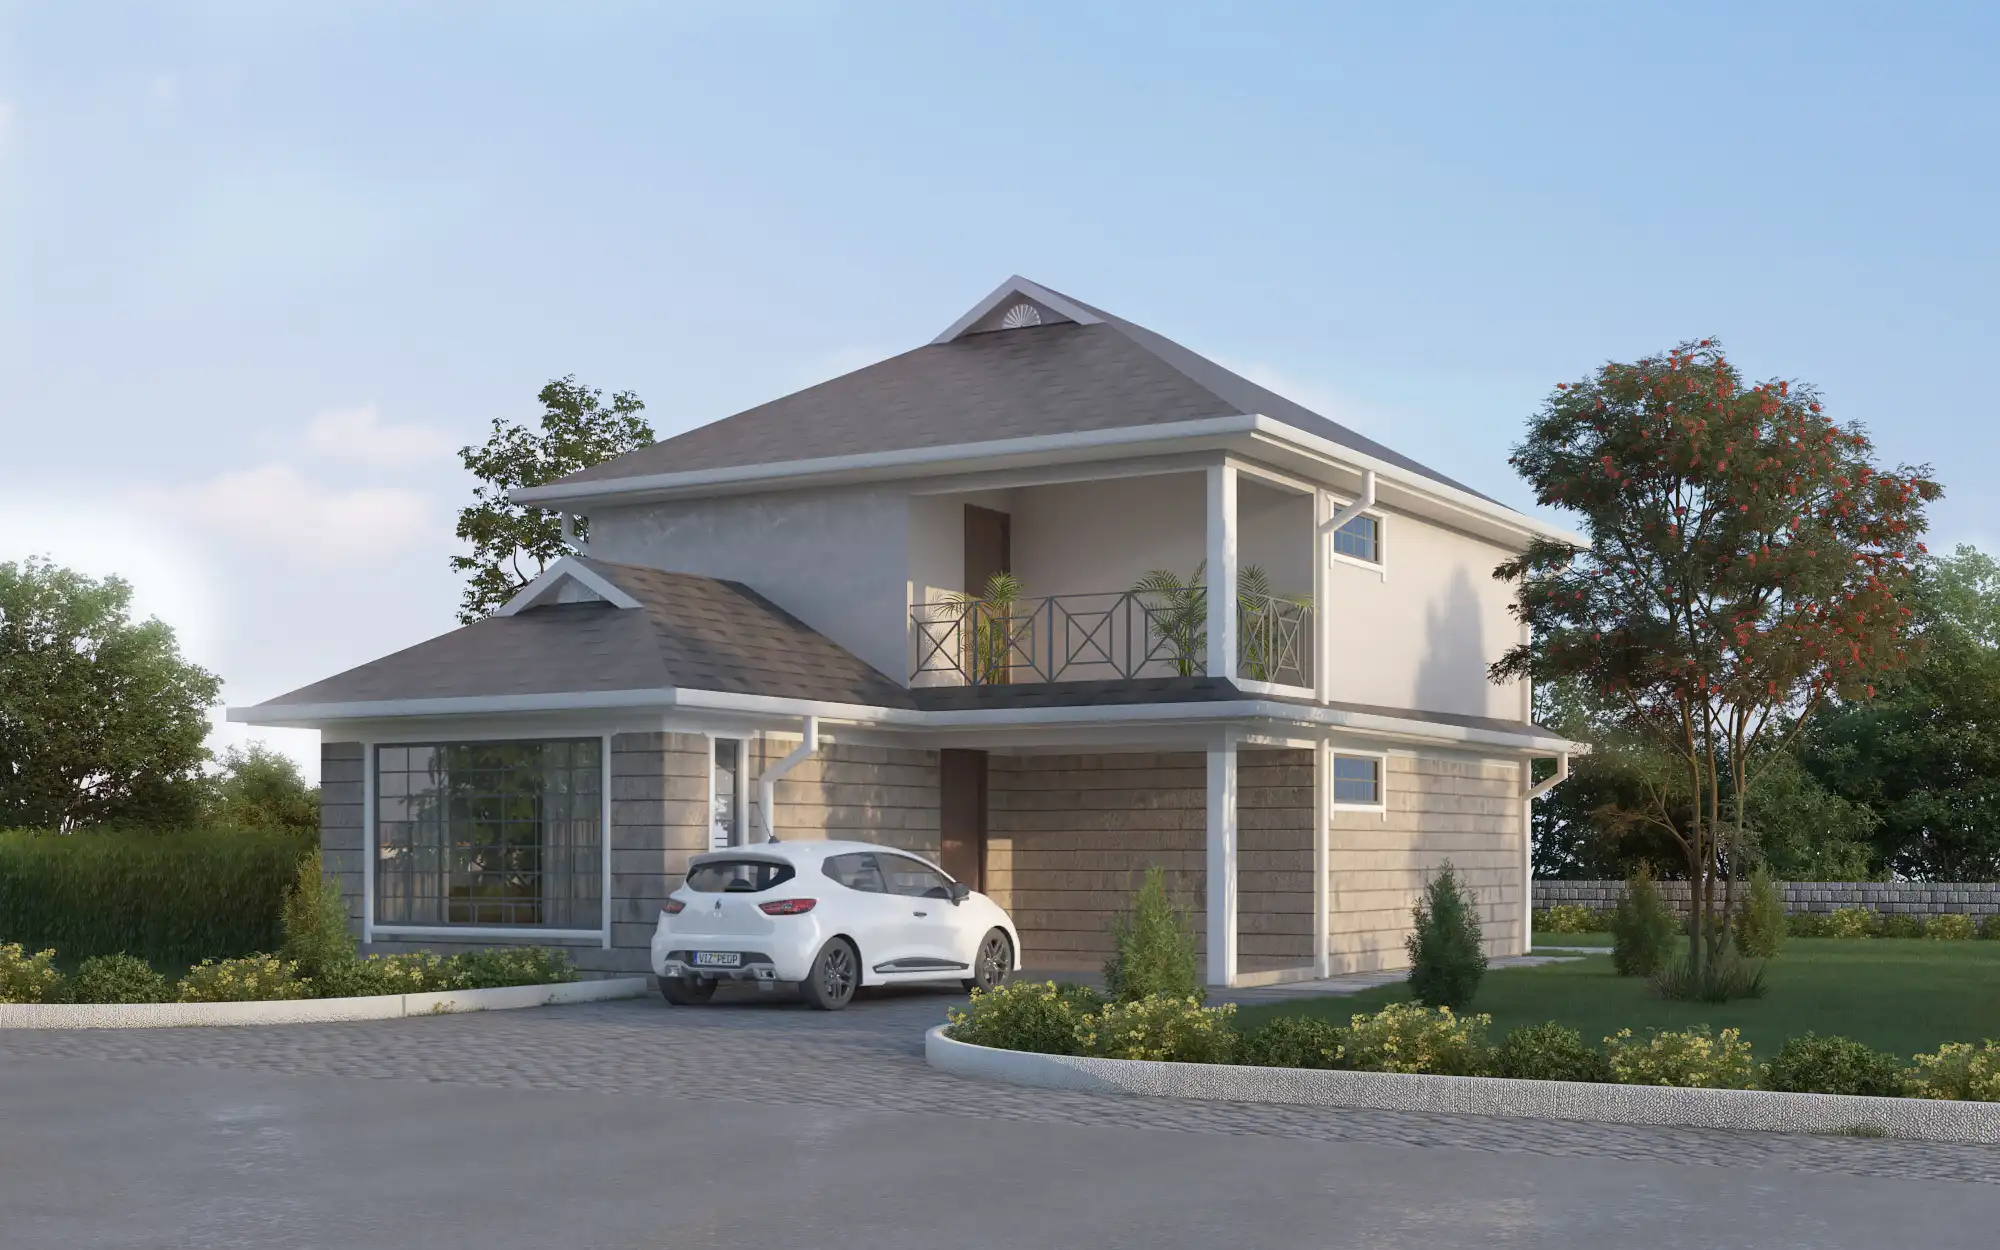 3 Bedroom Maisonette ID - 3251 - FRONT. from Inuua Tujenge house plans with 3 bedrooms and 3 bathrooms. ( maisonette )